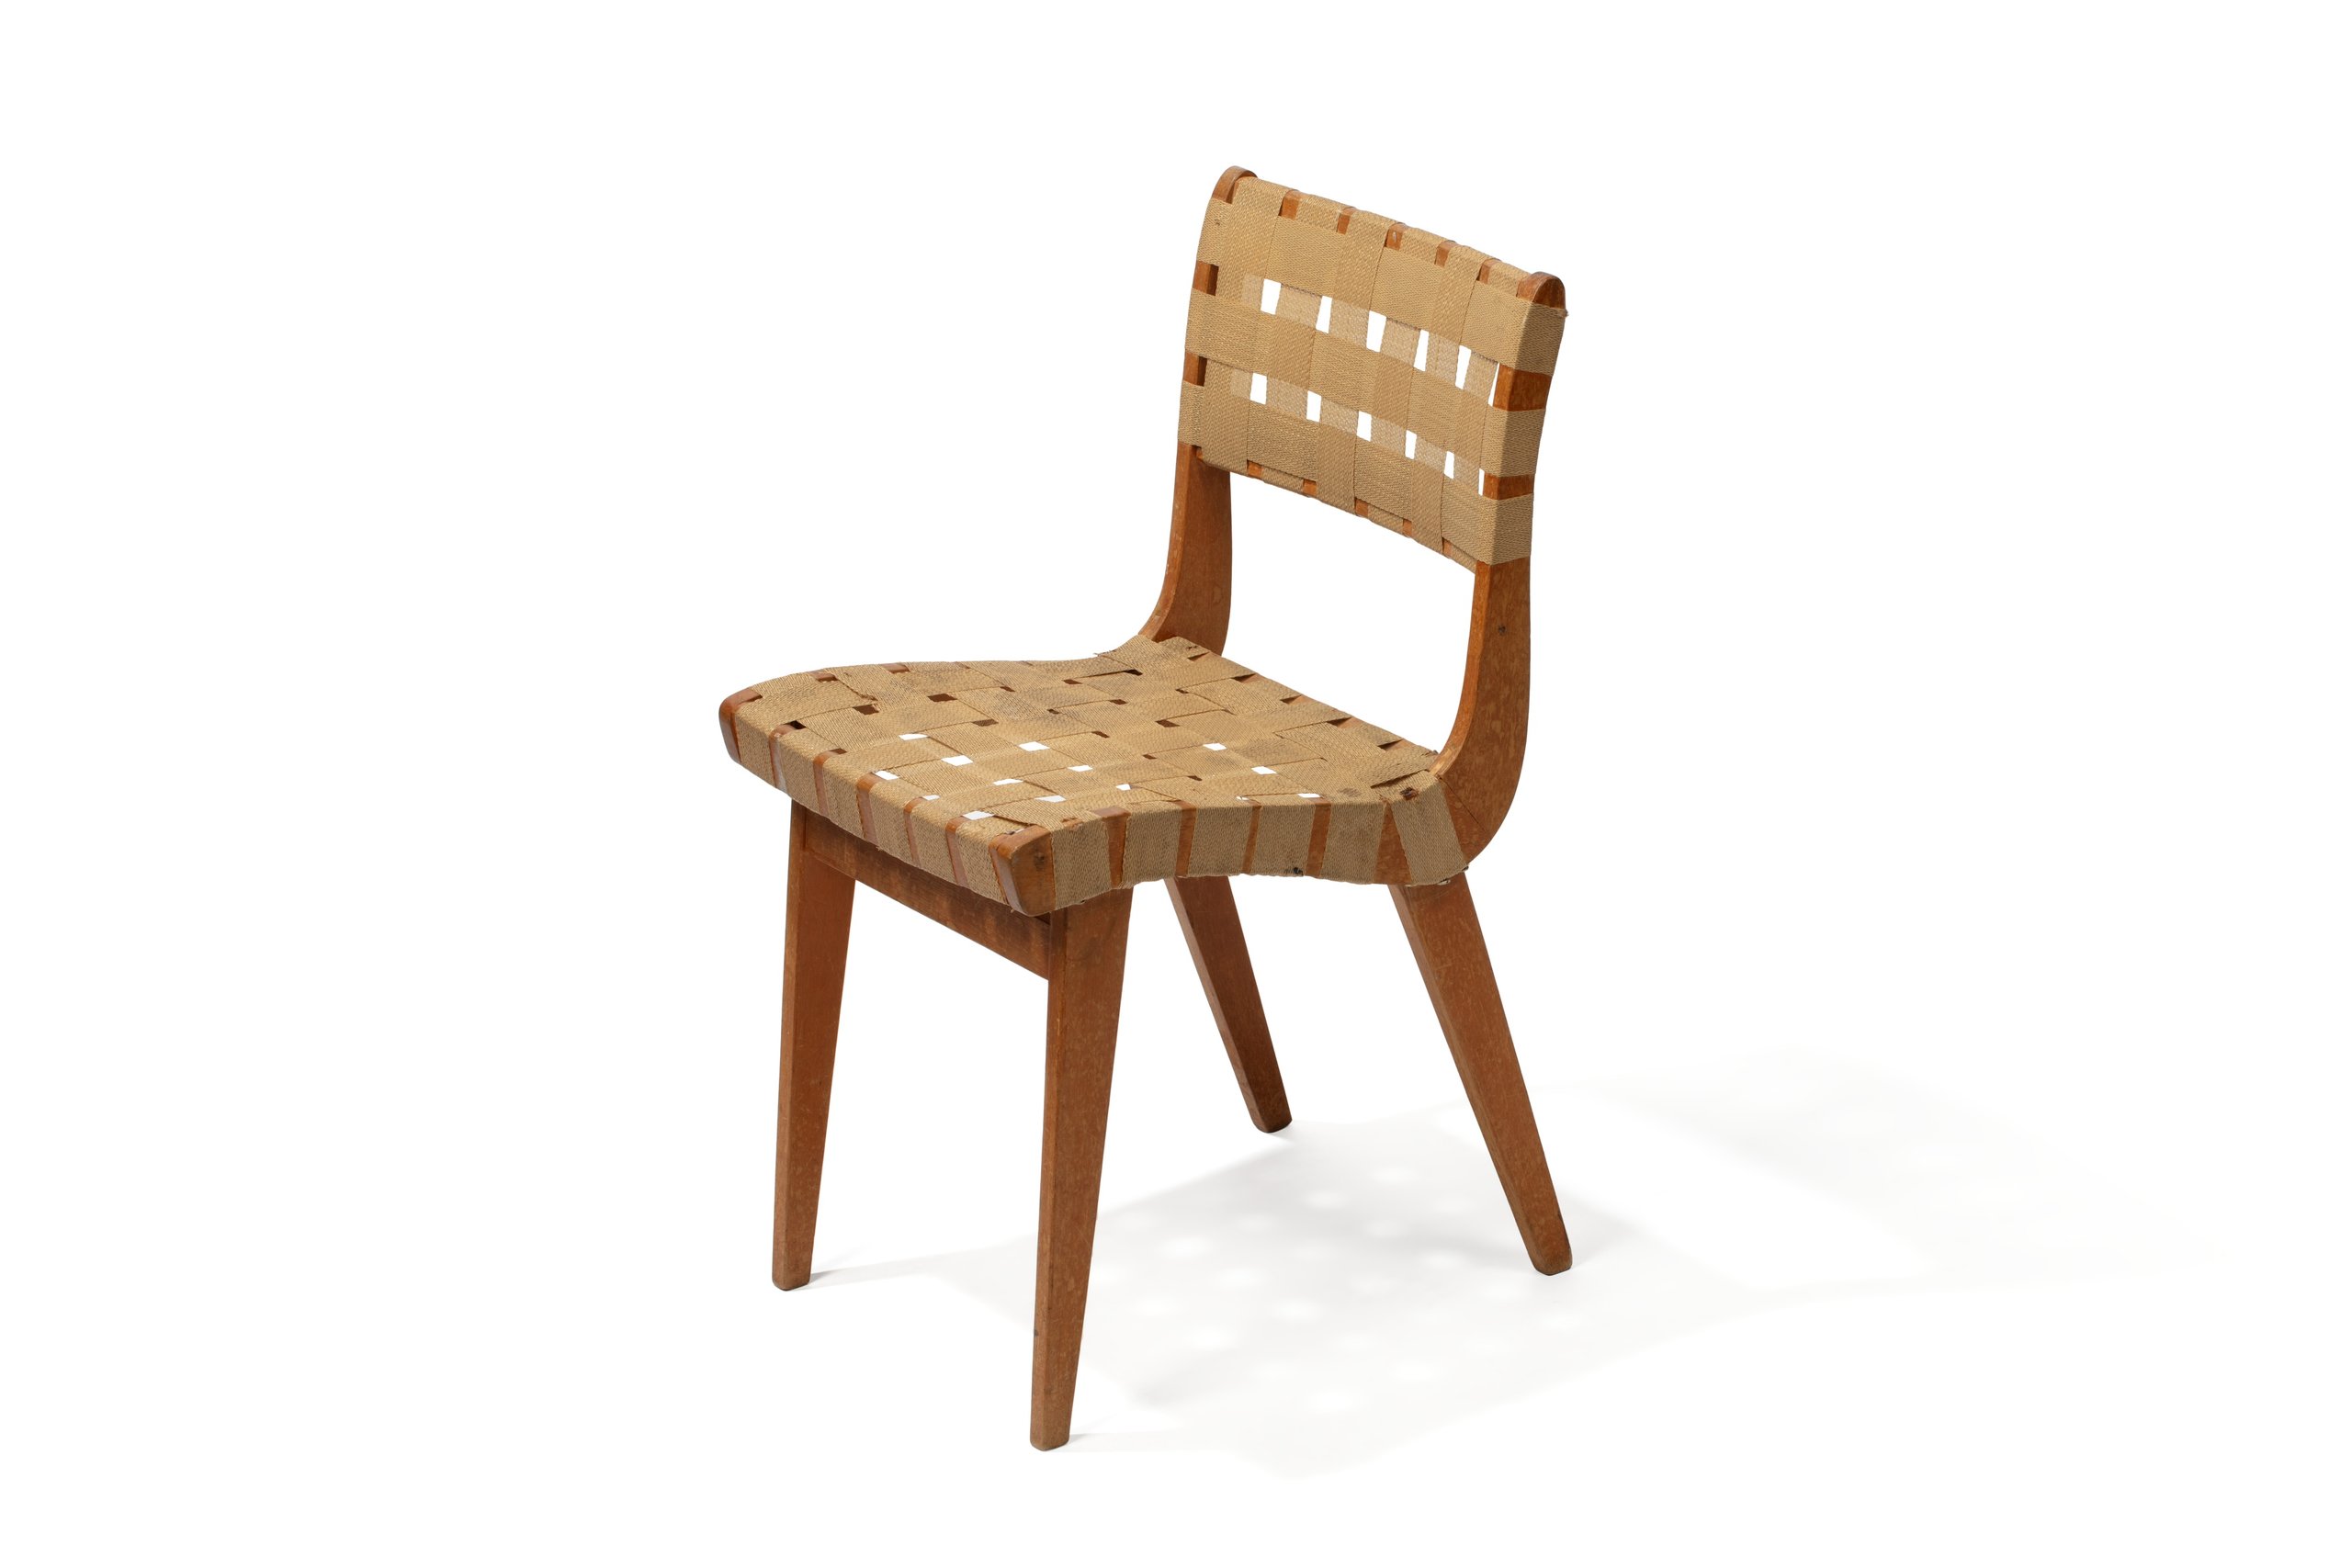 'Parachute' webbing dining chair by Douglas Snelling